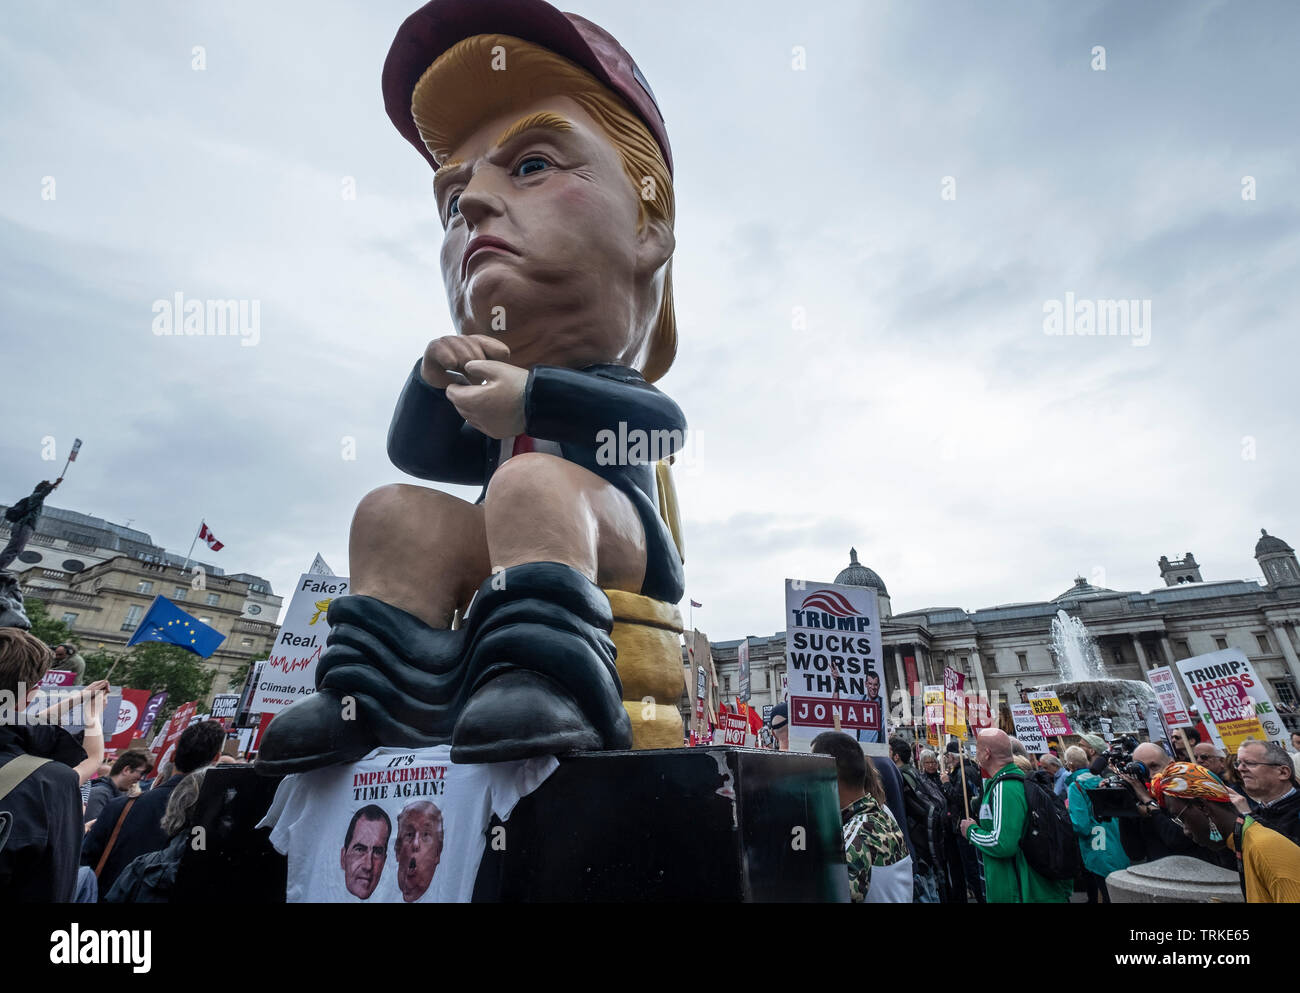 Giant Donald Trump effigy sitting on toilet at 'Carnival of Resistance' Anti-Trump Protest in London  during US President Trump's visit in Downing Street. Stock Photo